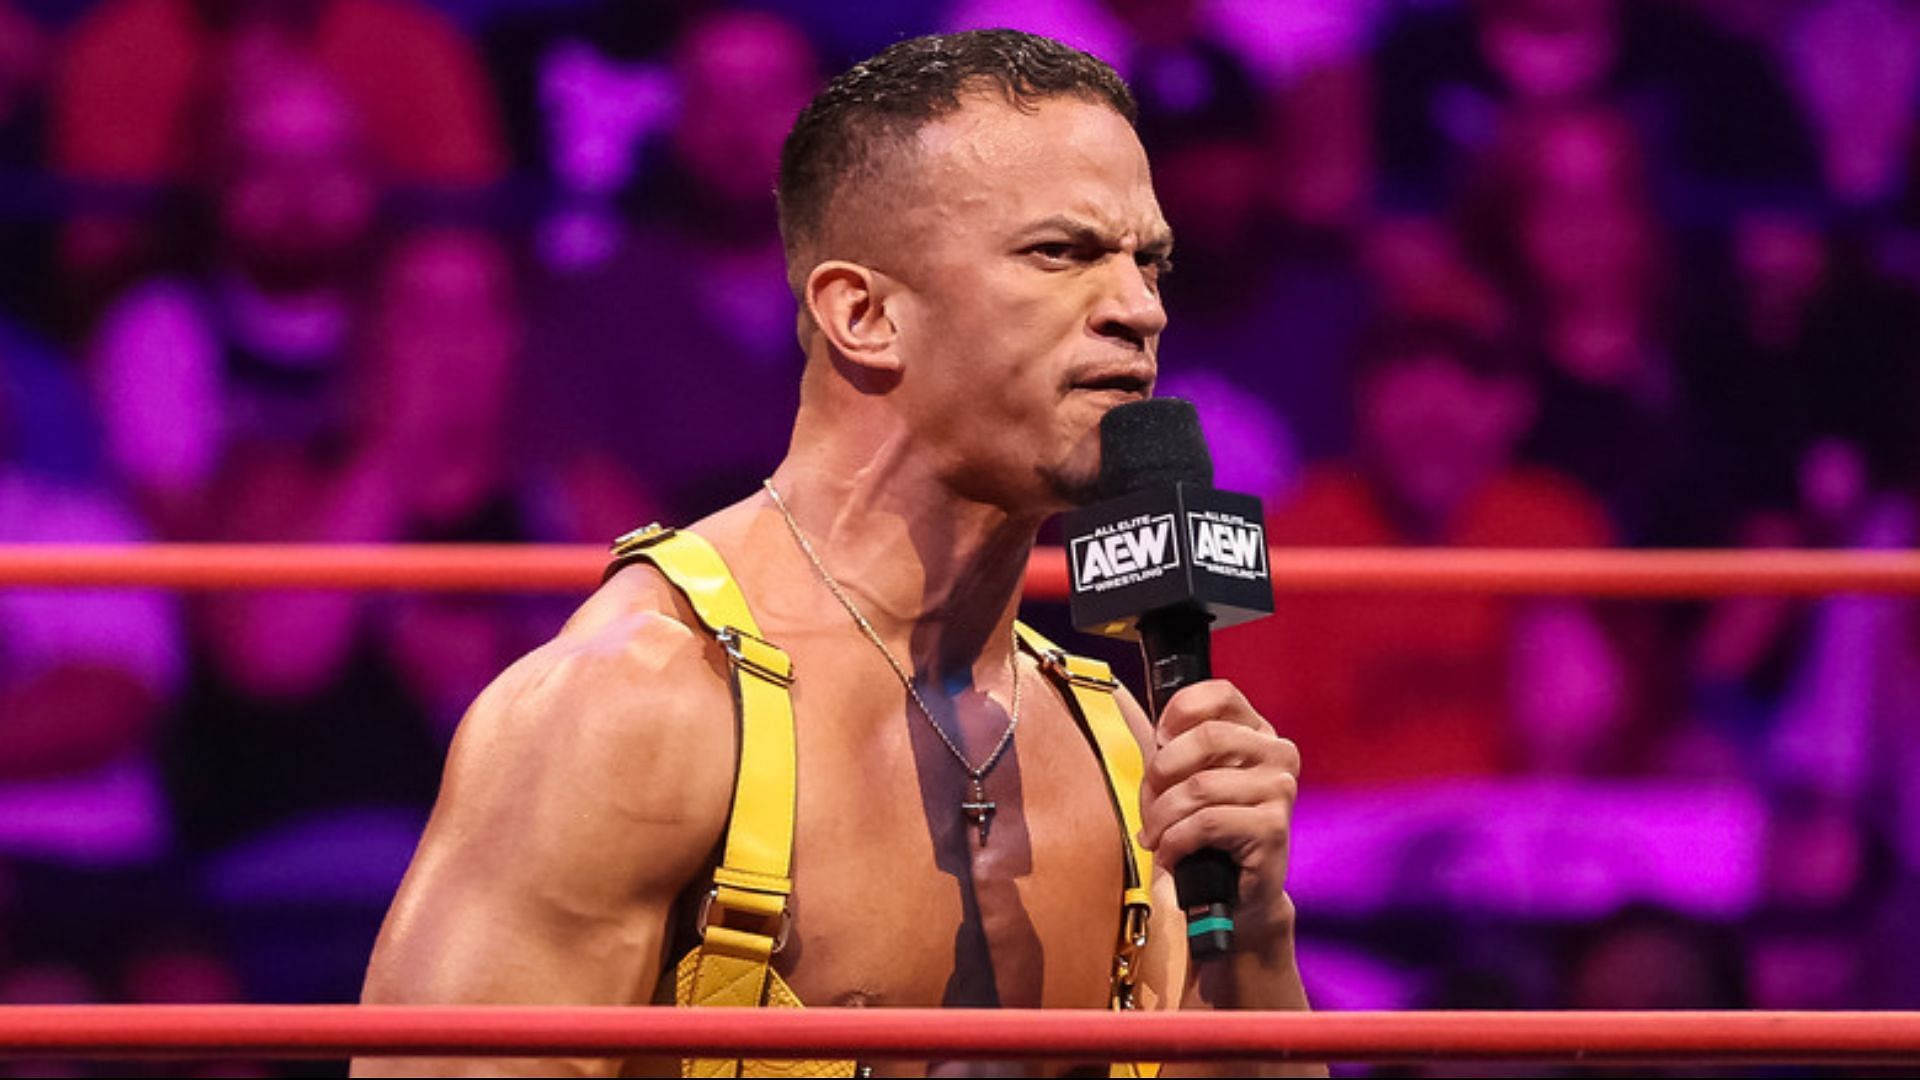 Ricky Starks is an AEW star who was recently suspended